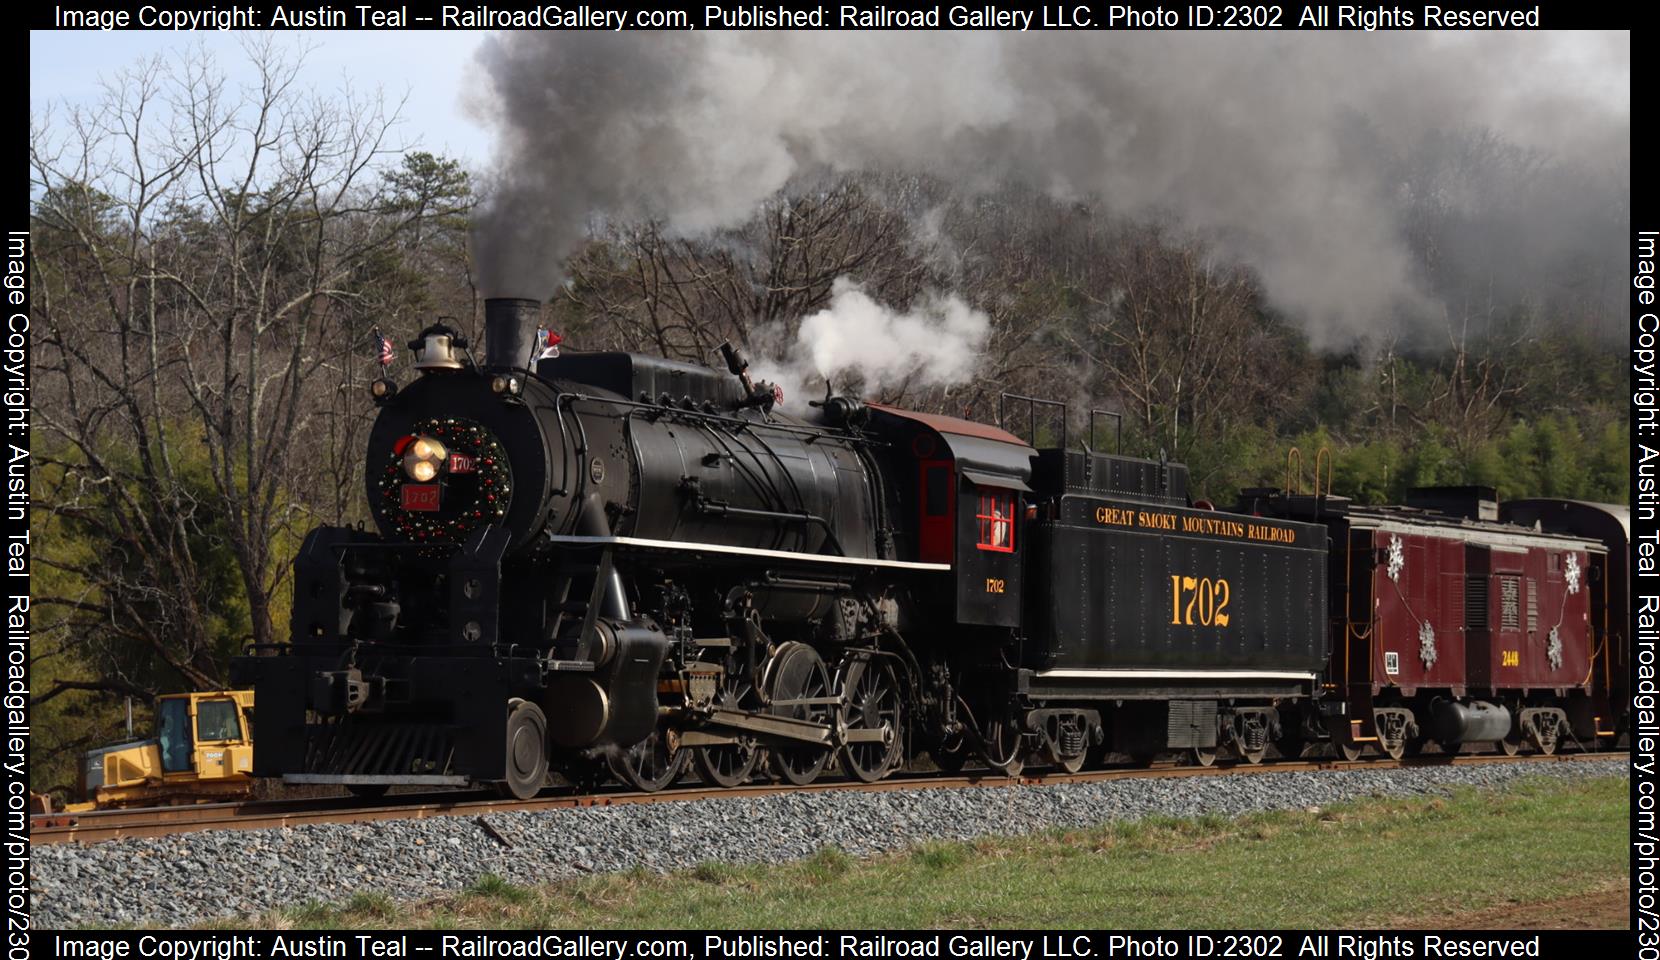 GSMR 1702 is a class 2-8-0 and  is pictured in Whittier , North Carolina, USA.  This was taken along the Murphy Branch  on the Great Smoky Mountain Railroad. Photo Copyright: Austin Teal uploaded to Railroad Gallery on 09/02/2023. This photograph of GSMR 1702 was taken on Monday, December 19, 2022. All Rights Reserved. 